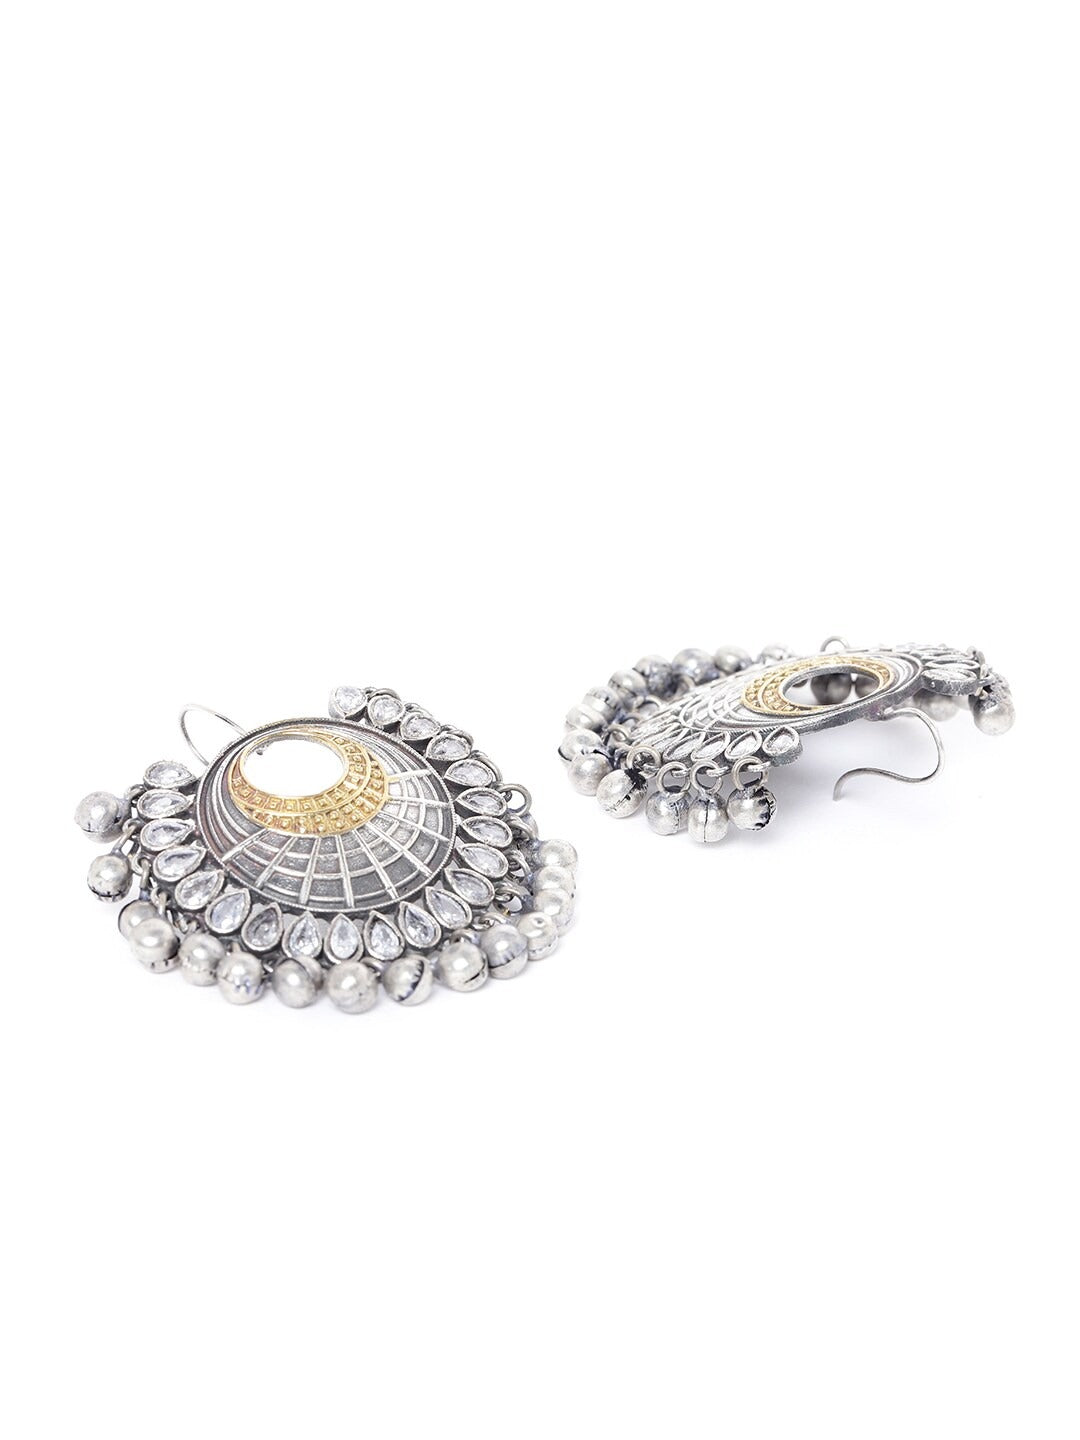 Gold-Toned Oxidised Silver-Plated CZ Studded Circular Drop Earrings